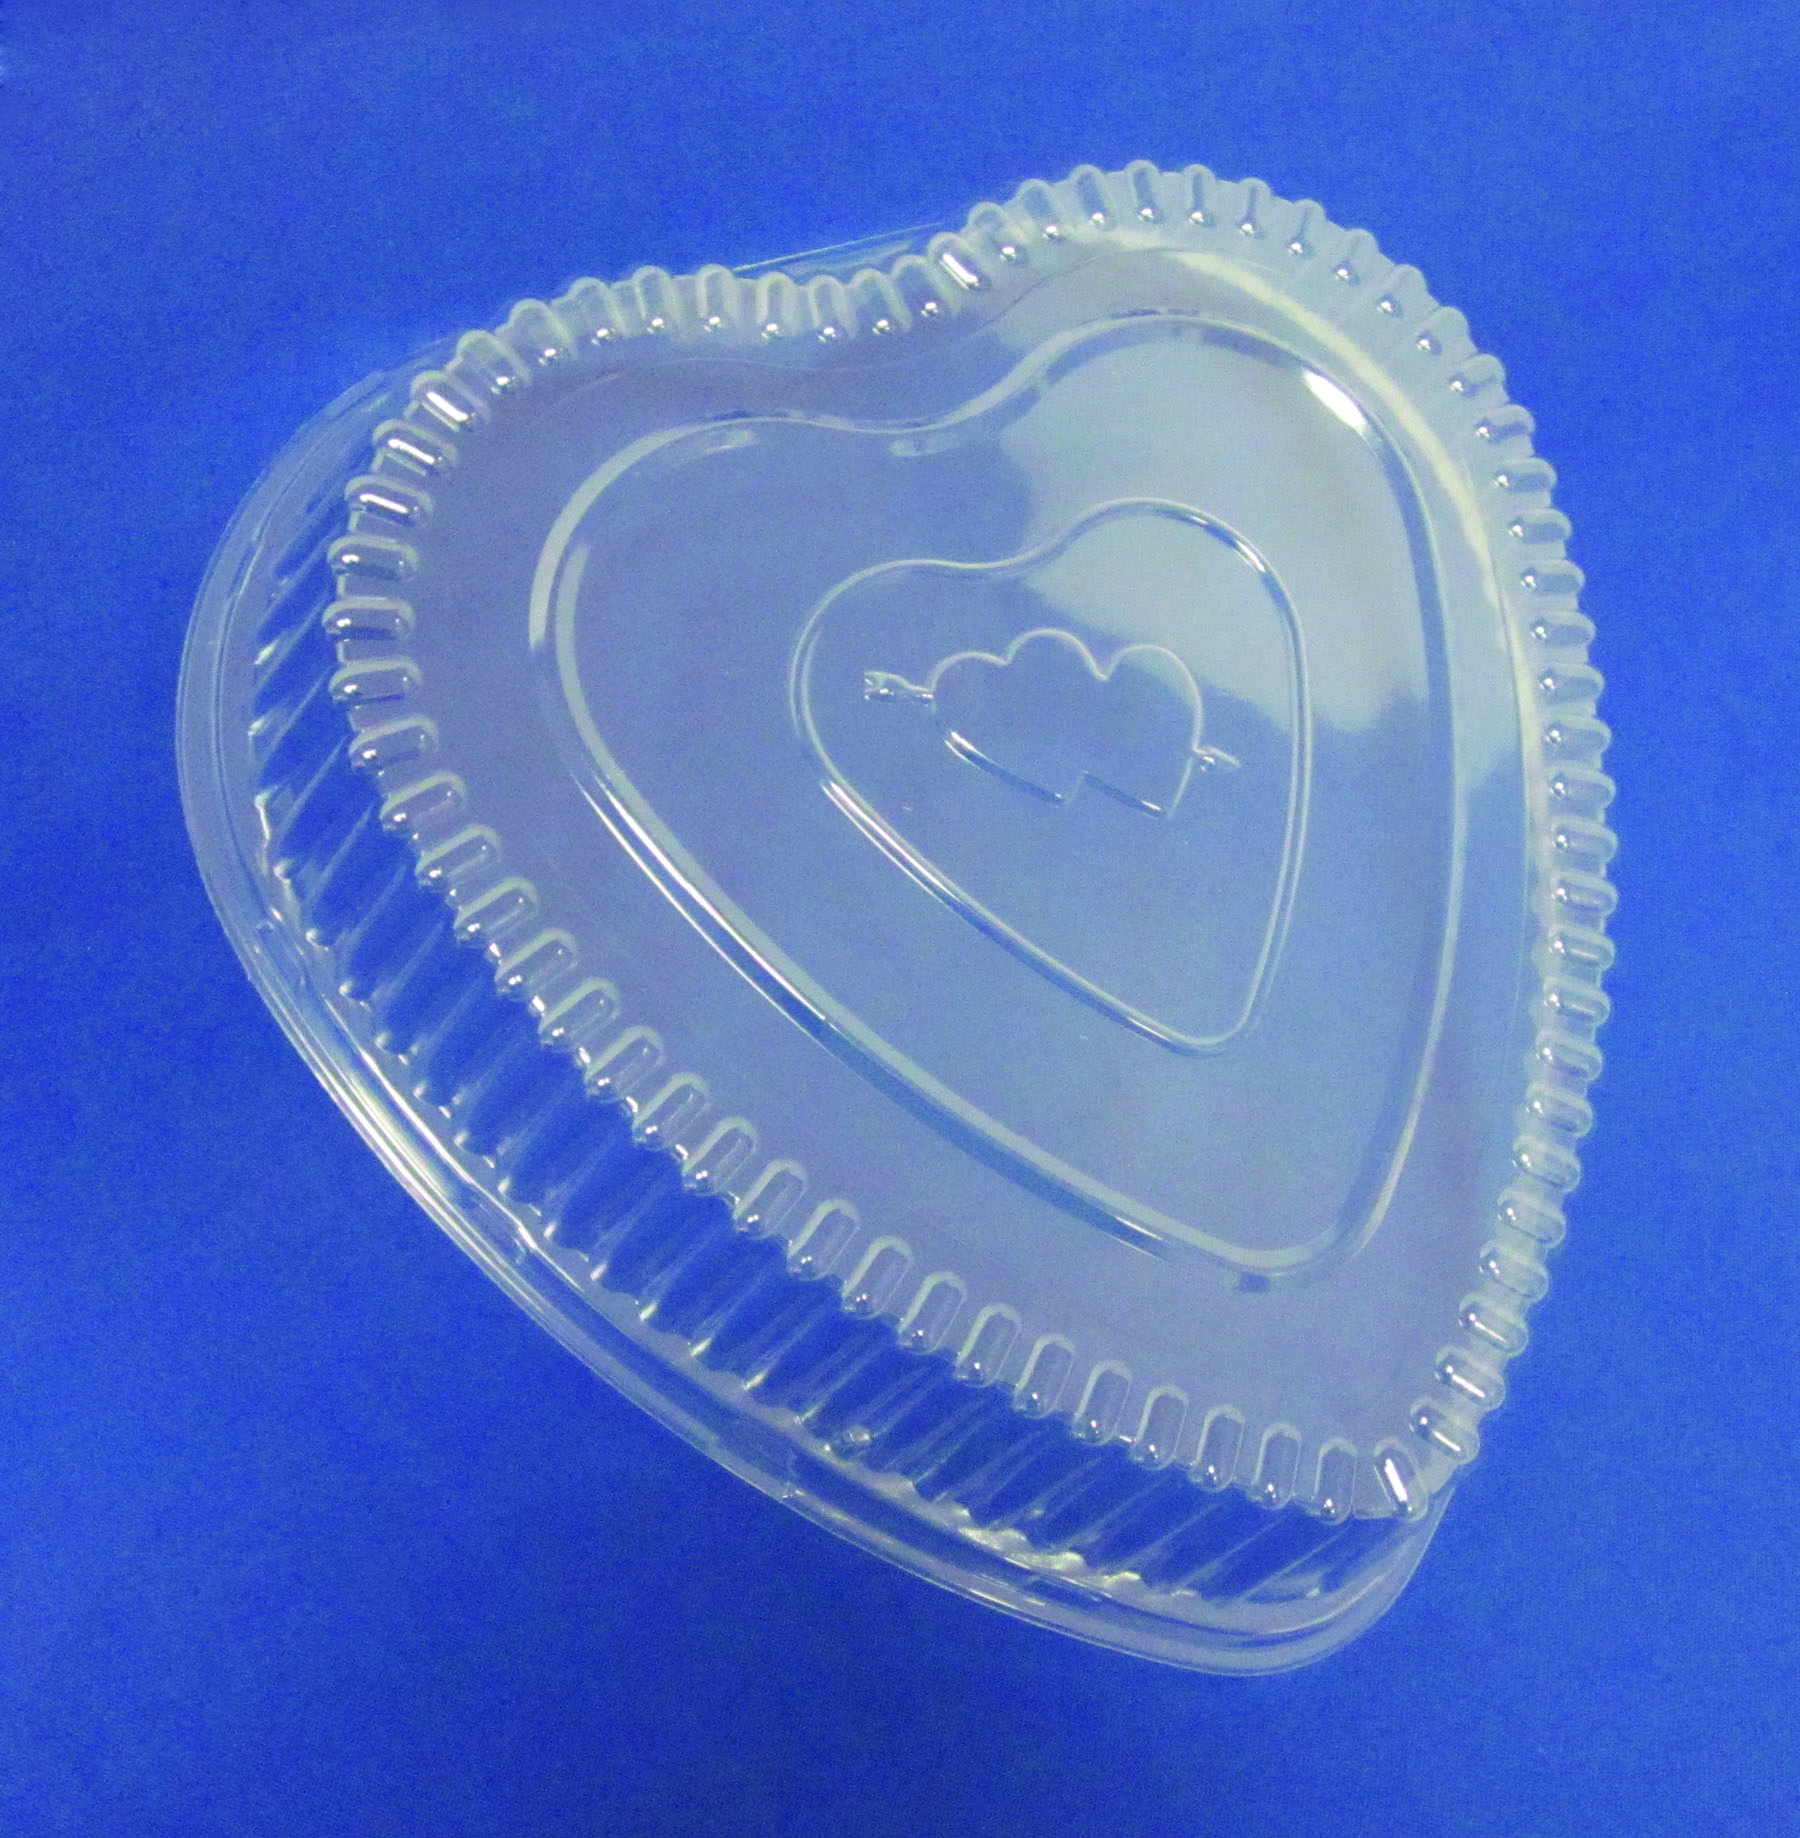 http://www.durablepackaging.com/images/products/271138_P9701V.jpg